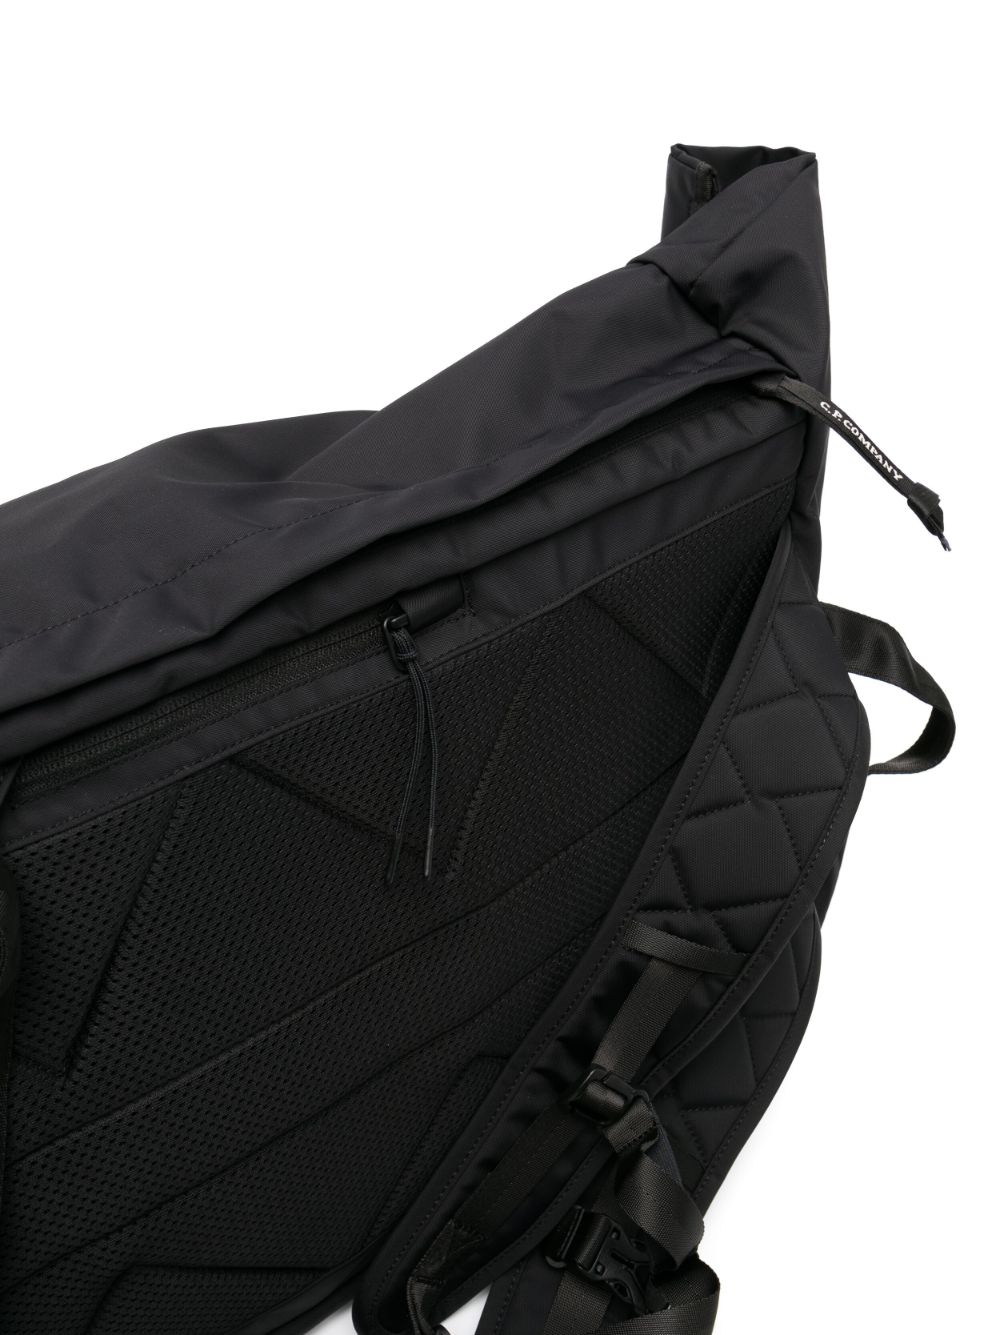 C.P. Company roll-top Padded Backpack - Farfetch